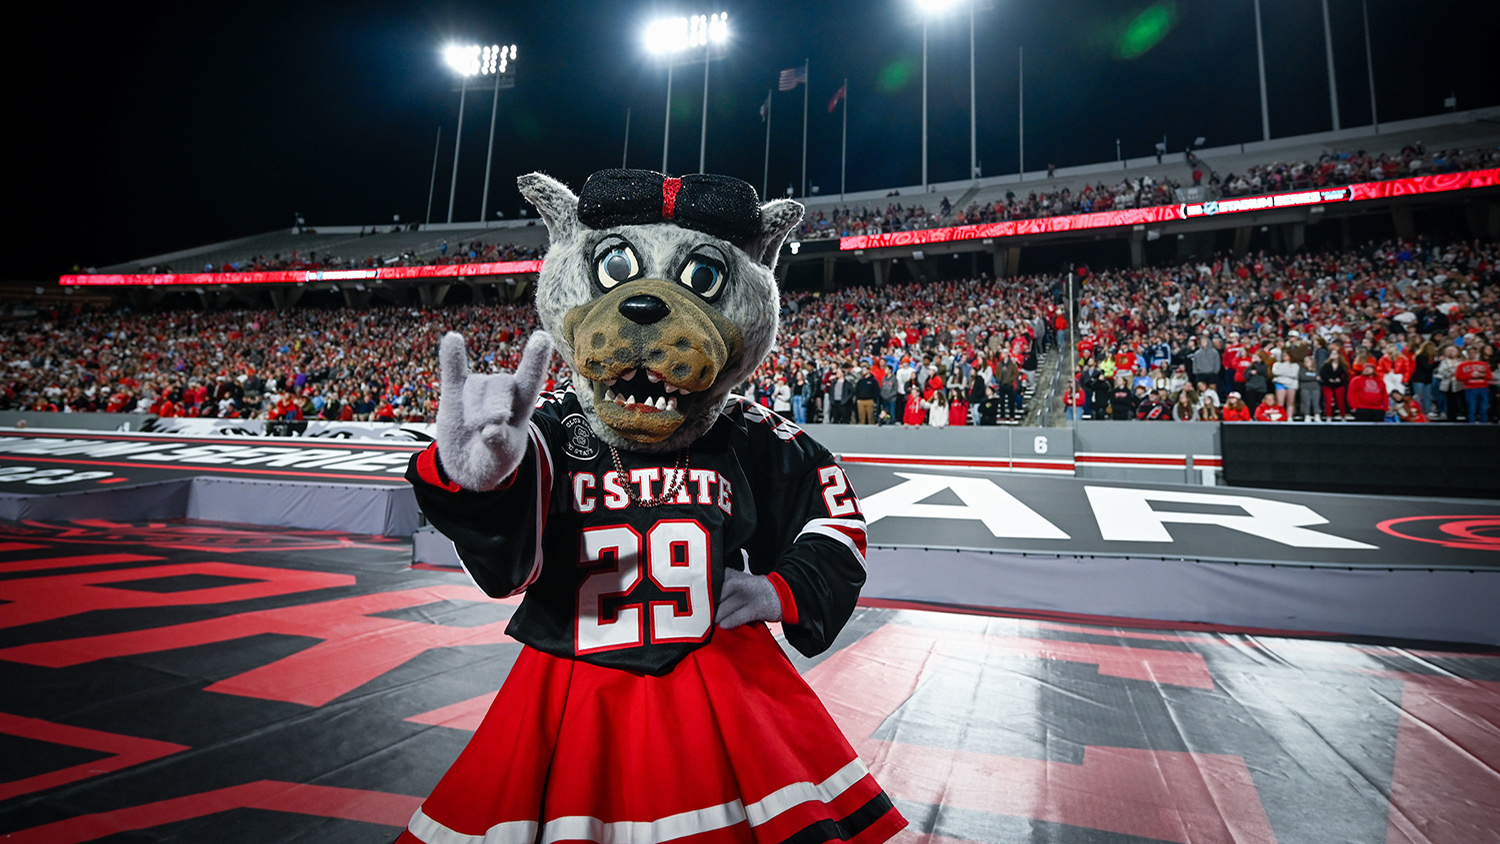 mrs. wolf nc state mascot dressed in nc state apparel